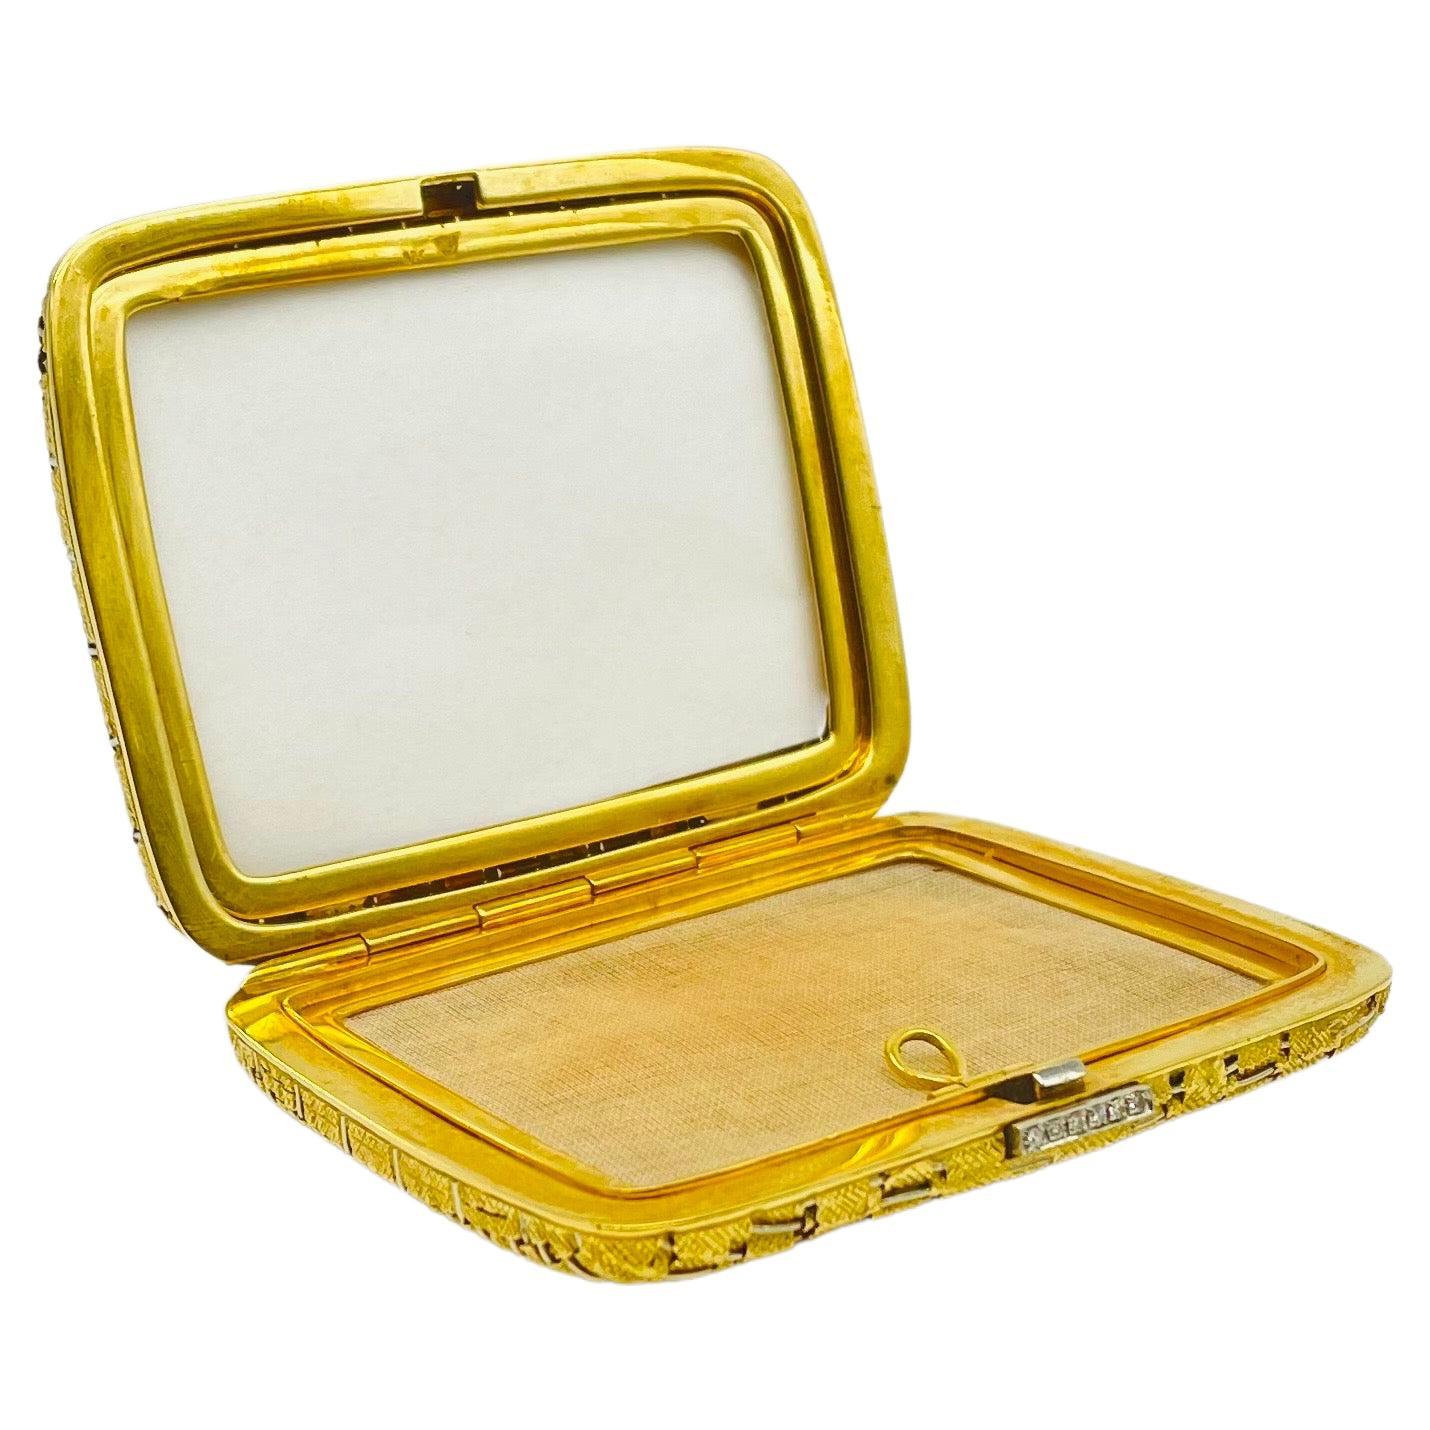 
Immerse yourself in the dreamlike beauty of this exquisite Art Deco powder compact, an opulent masterpiece crafted in 18k yellow gold. Weighing an impressive 129g, this luxurious accessory is a true testament to elegance and sophistication. This